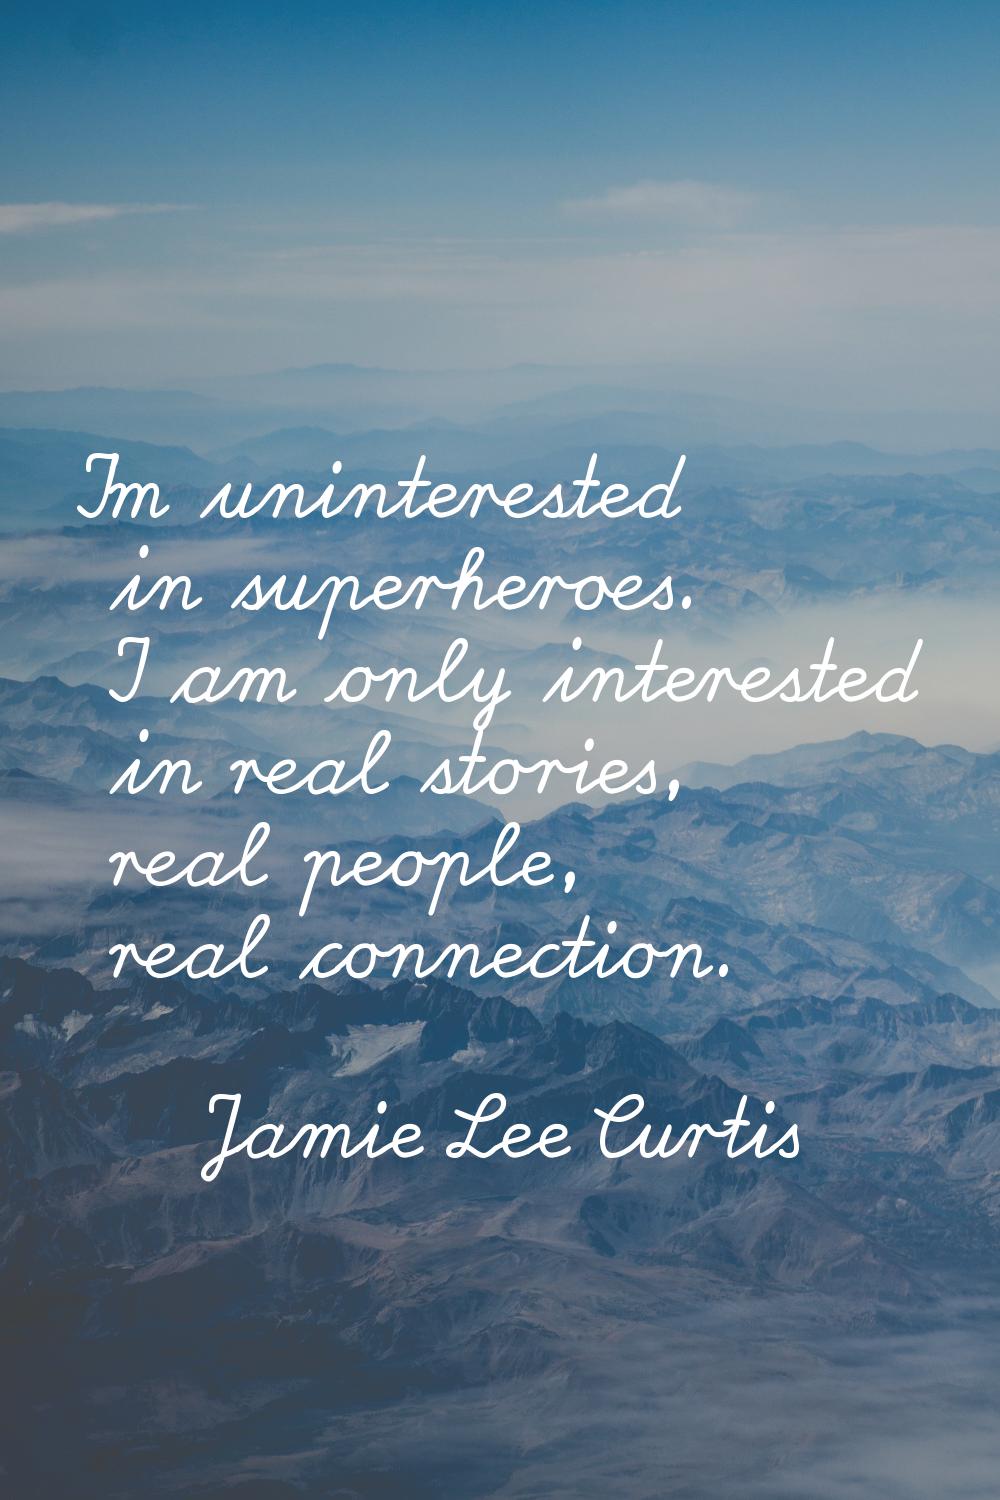 I'm uninterested in superheroes. I am only interested in real stories, real people, real connection